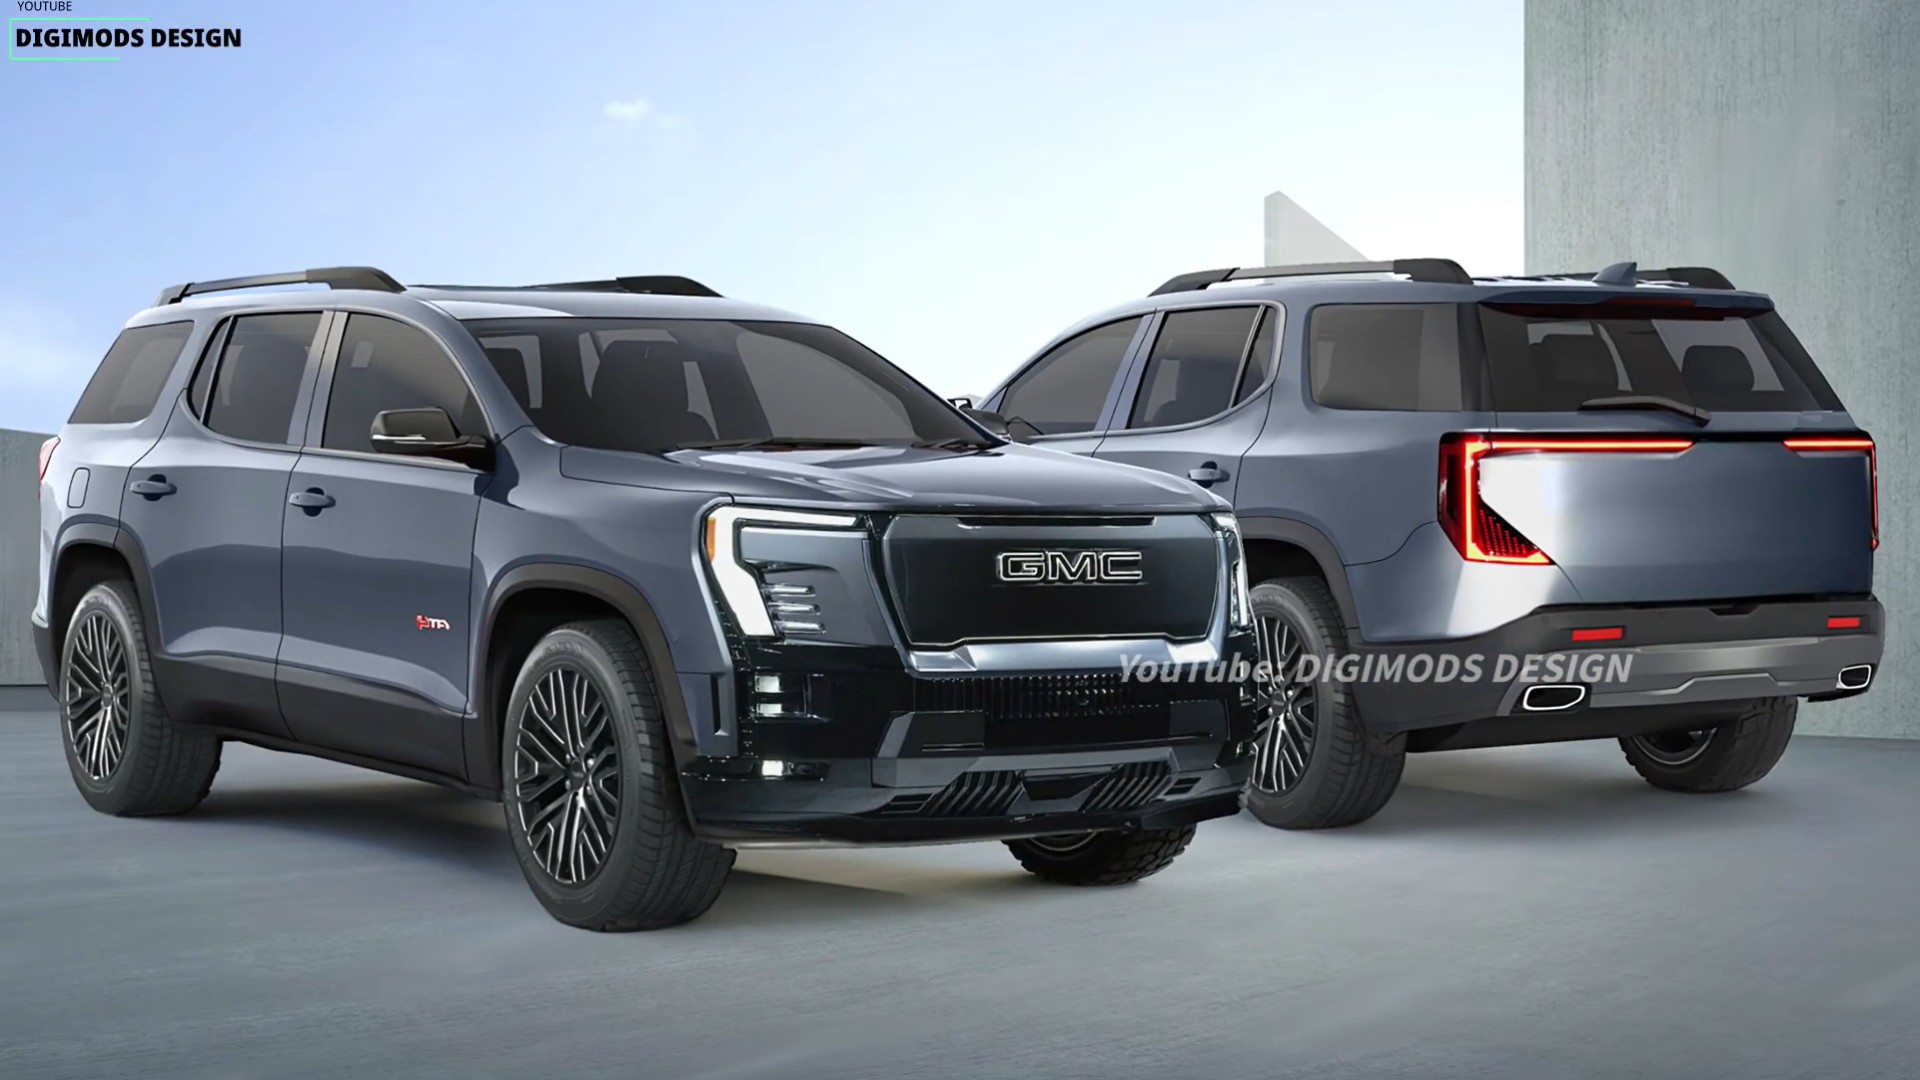 Imagined 2025 GMC Acadia Adopts the Sierra EV's Styling but Keeps ICE